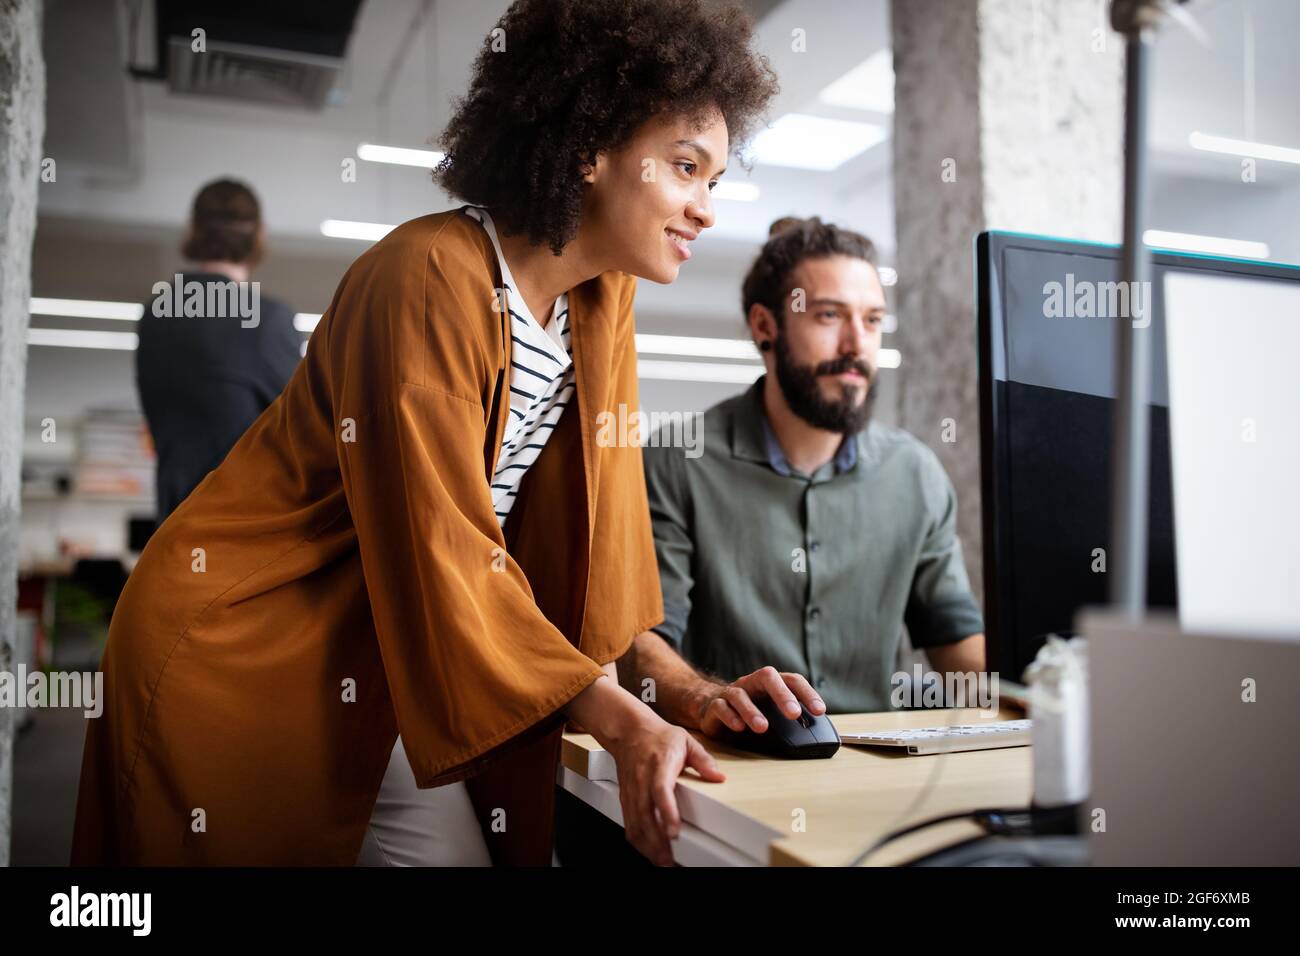 Business People Good Teamwork In Office Teamwork Successful Meeting Workplace Concept Stock Photo Alamy